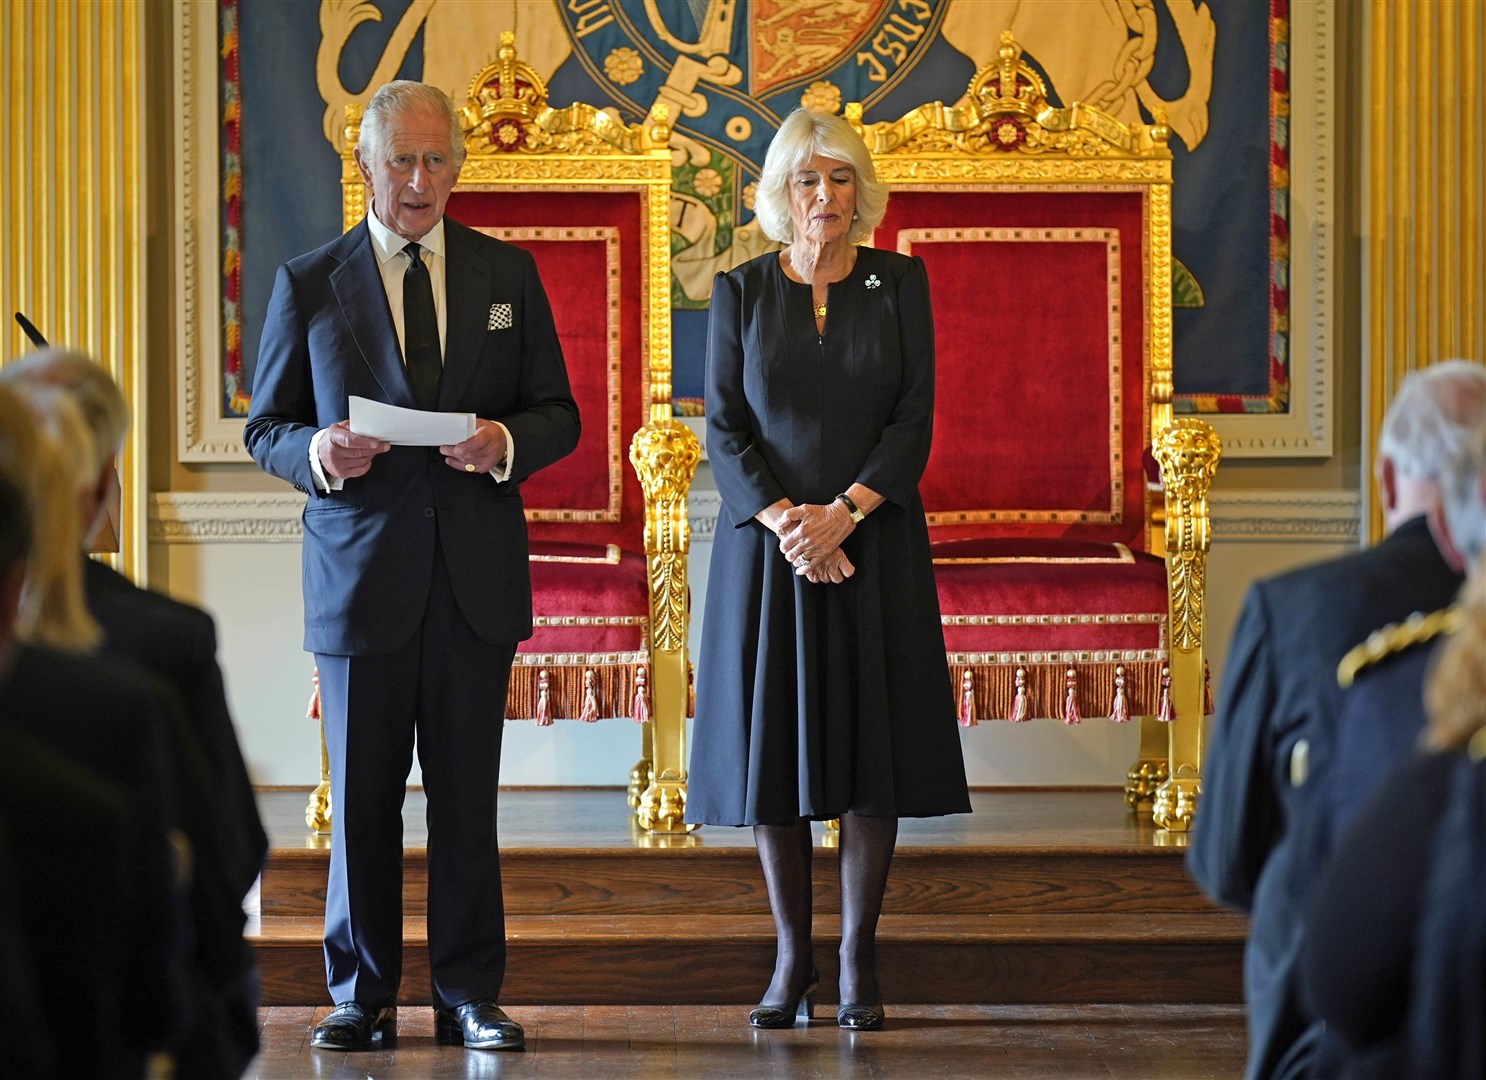 Speaking at Hillsborough Castle, the King said his mother felt deeply “the significance of the role she herself played in bringing together those whom history had separated” (Niall Carson/PA)